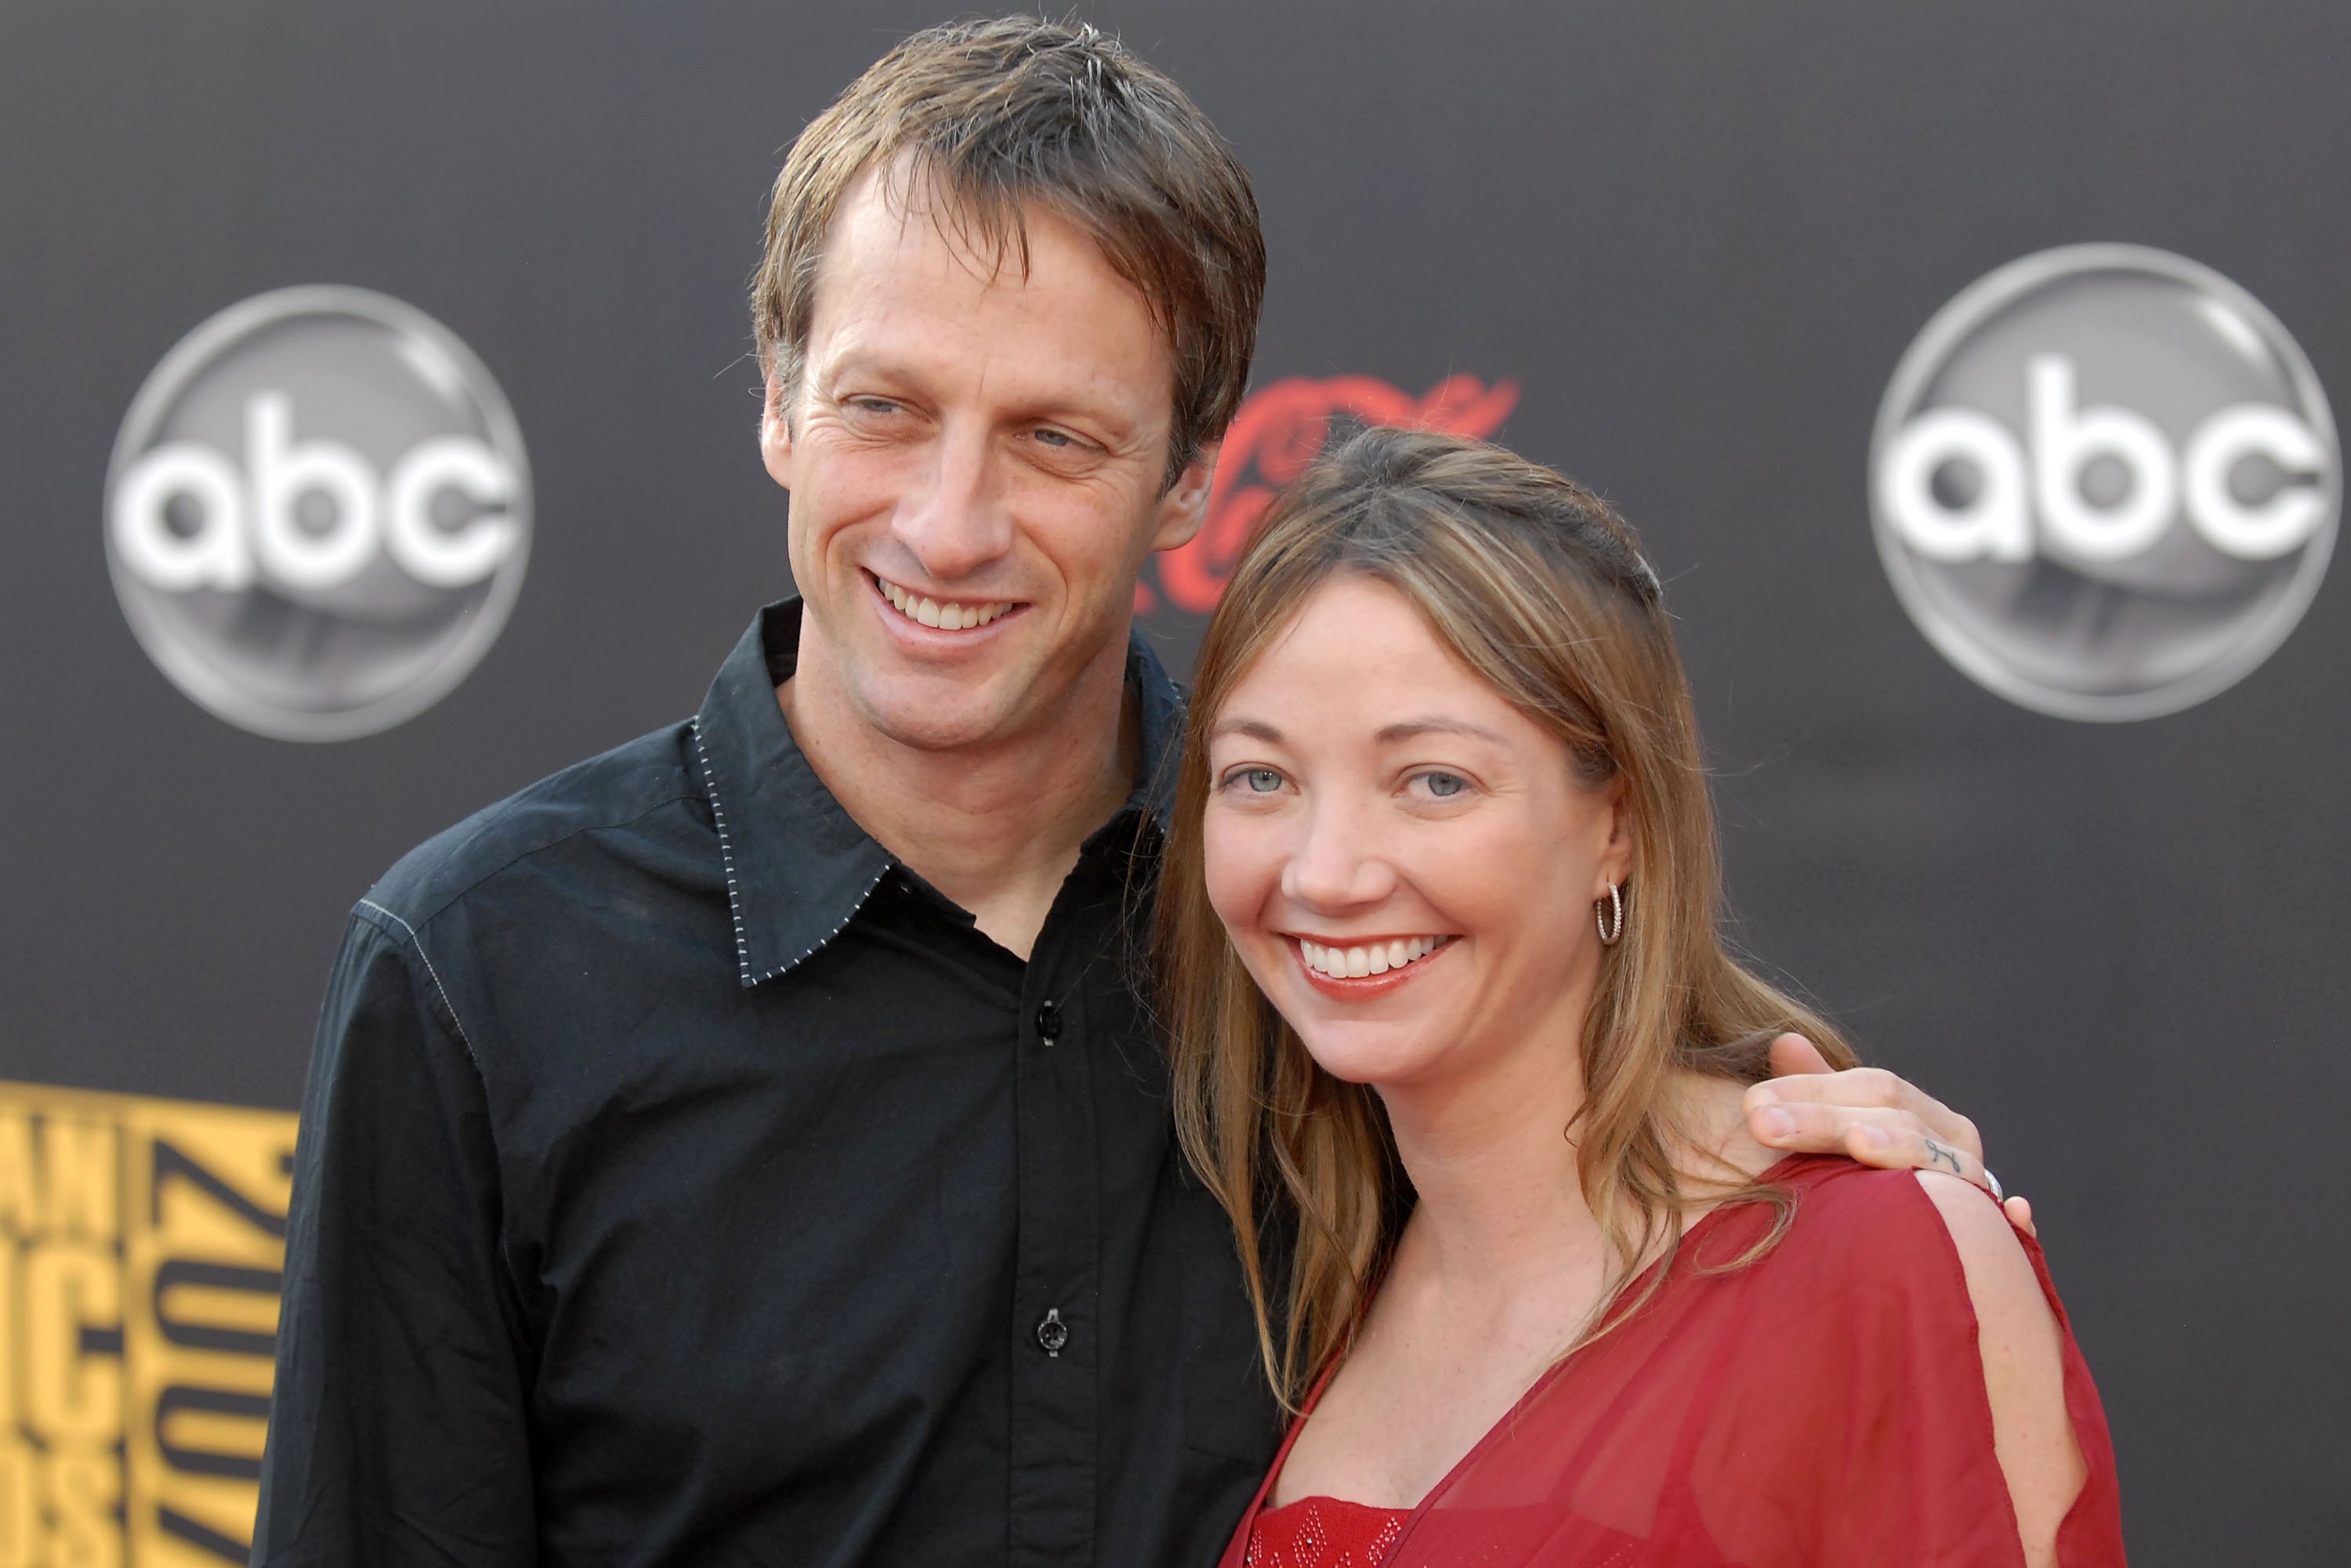 Tony Hawk and Lhotse Merriam attend the 2007 American Music Awards at the Nokia Theatre on November 18, 2007, in Los Angeles, California. | Source: Getty Images